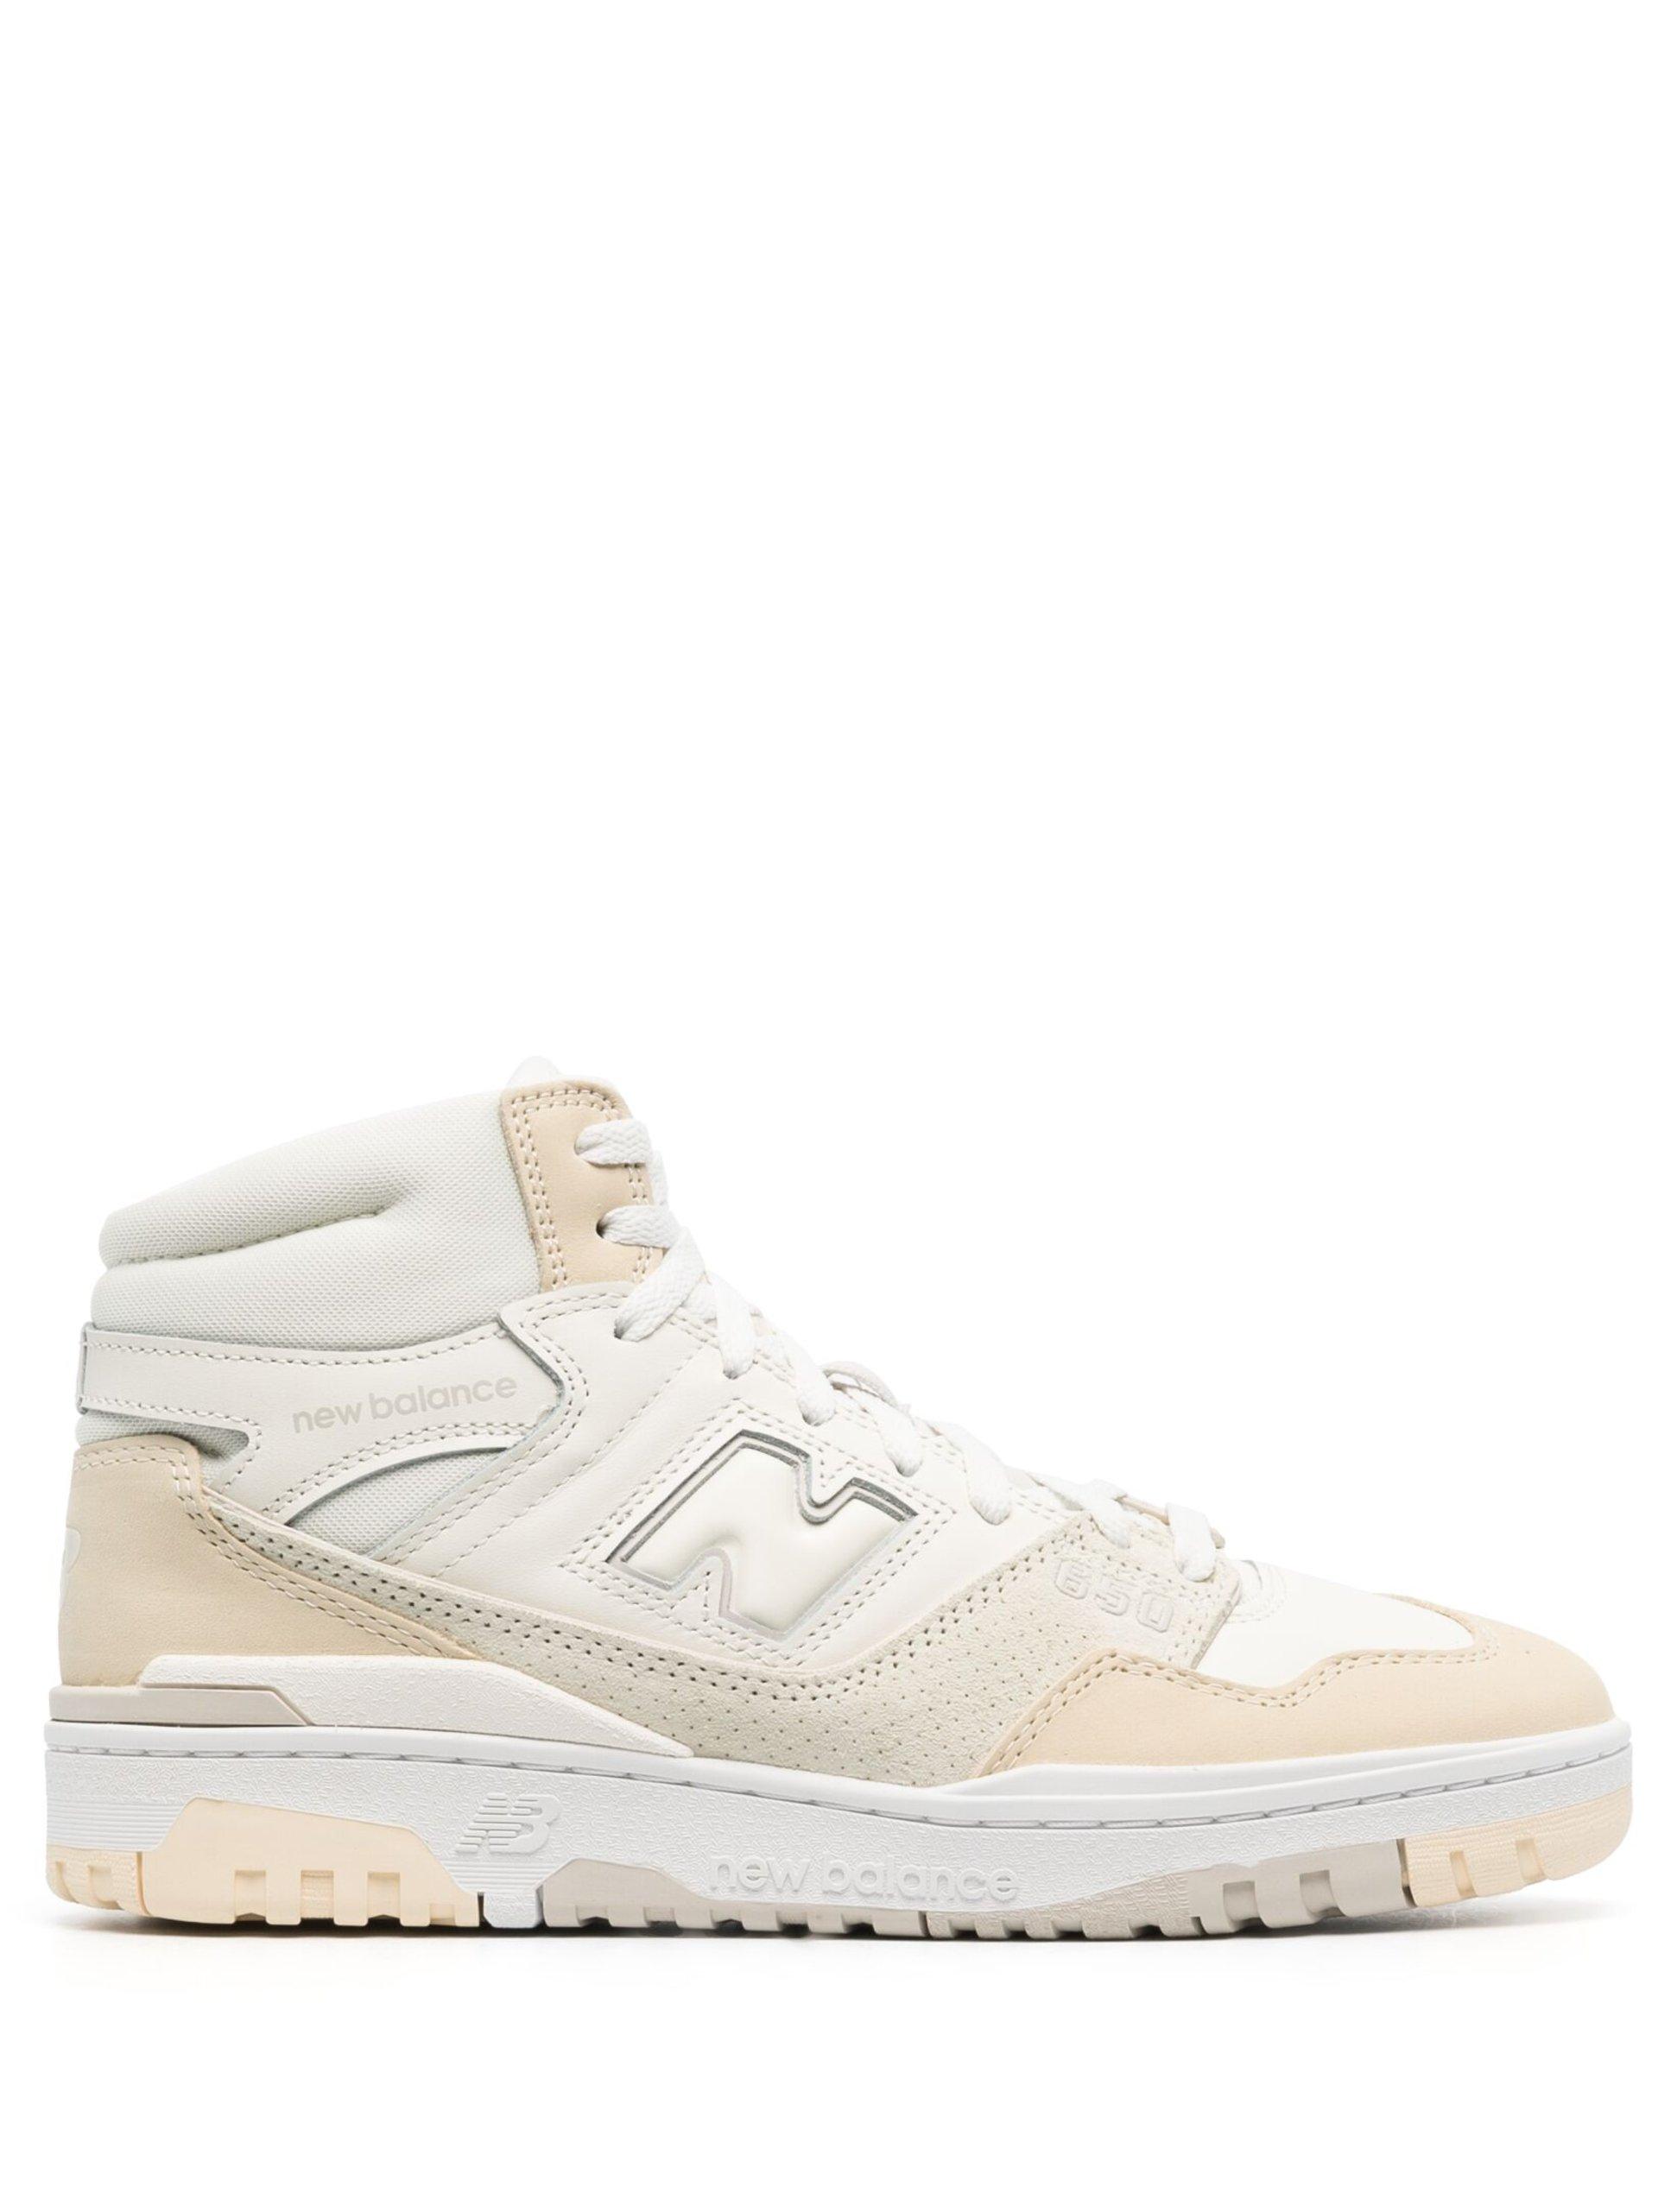 New Balance 650 High-top Sneakers in White | Lyst